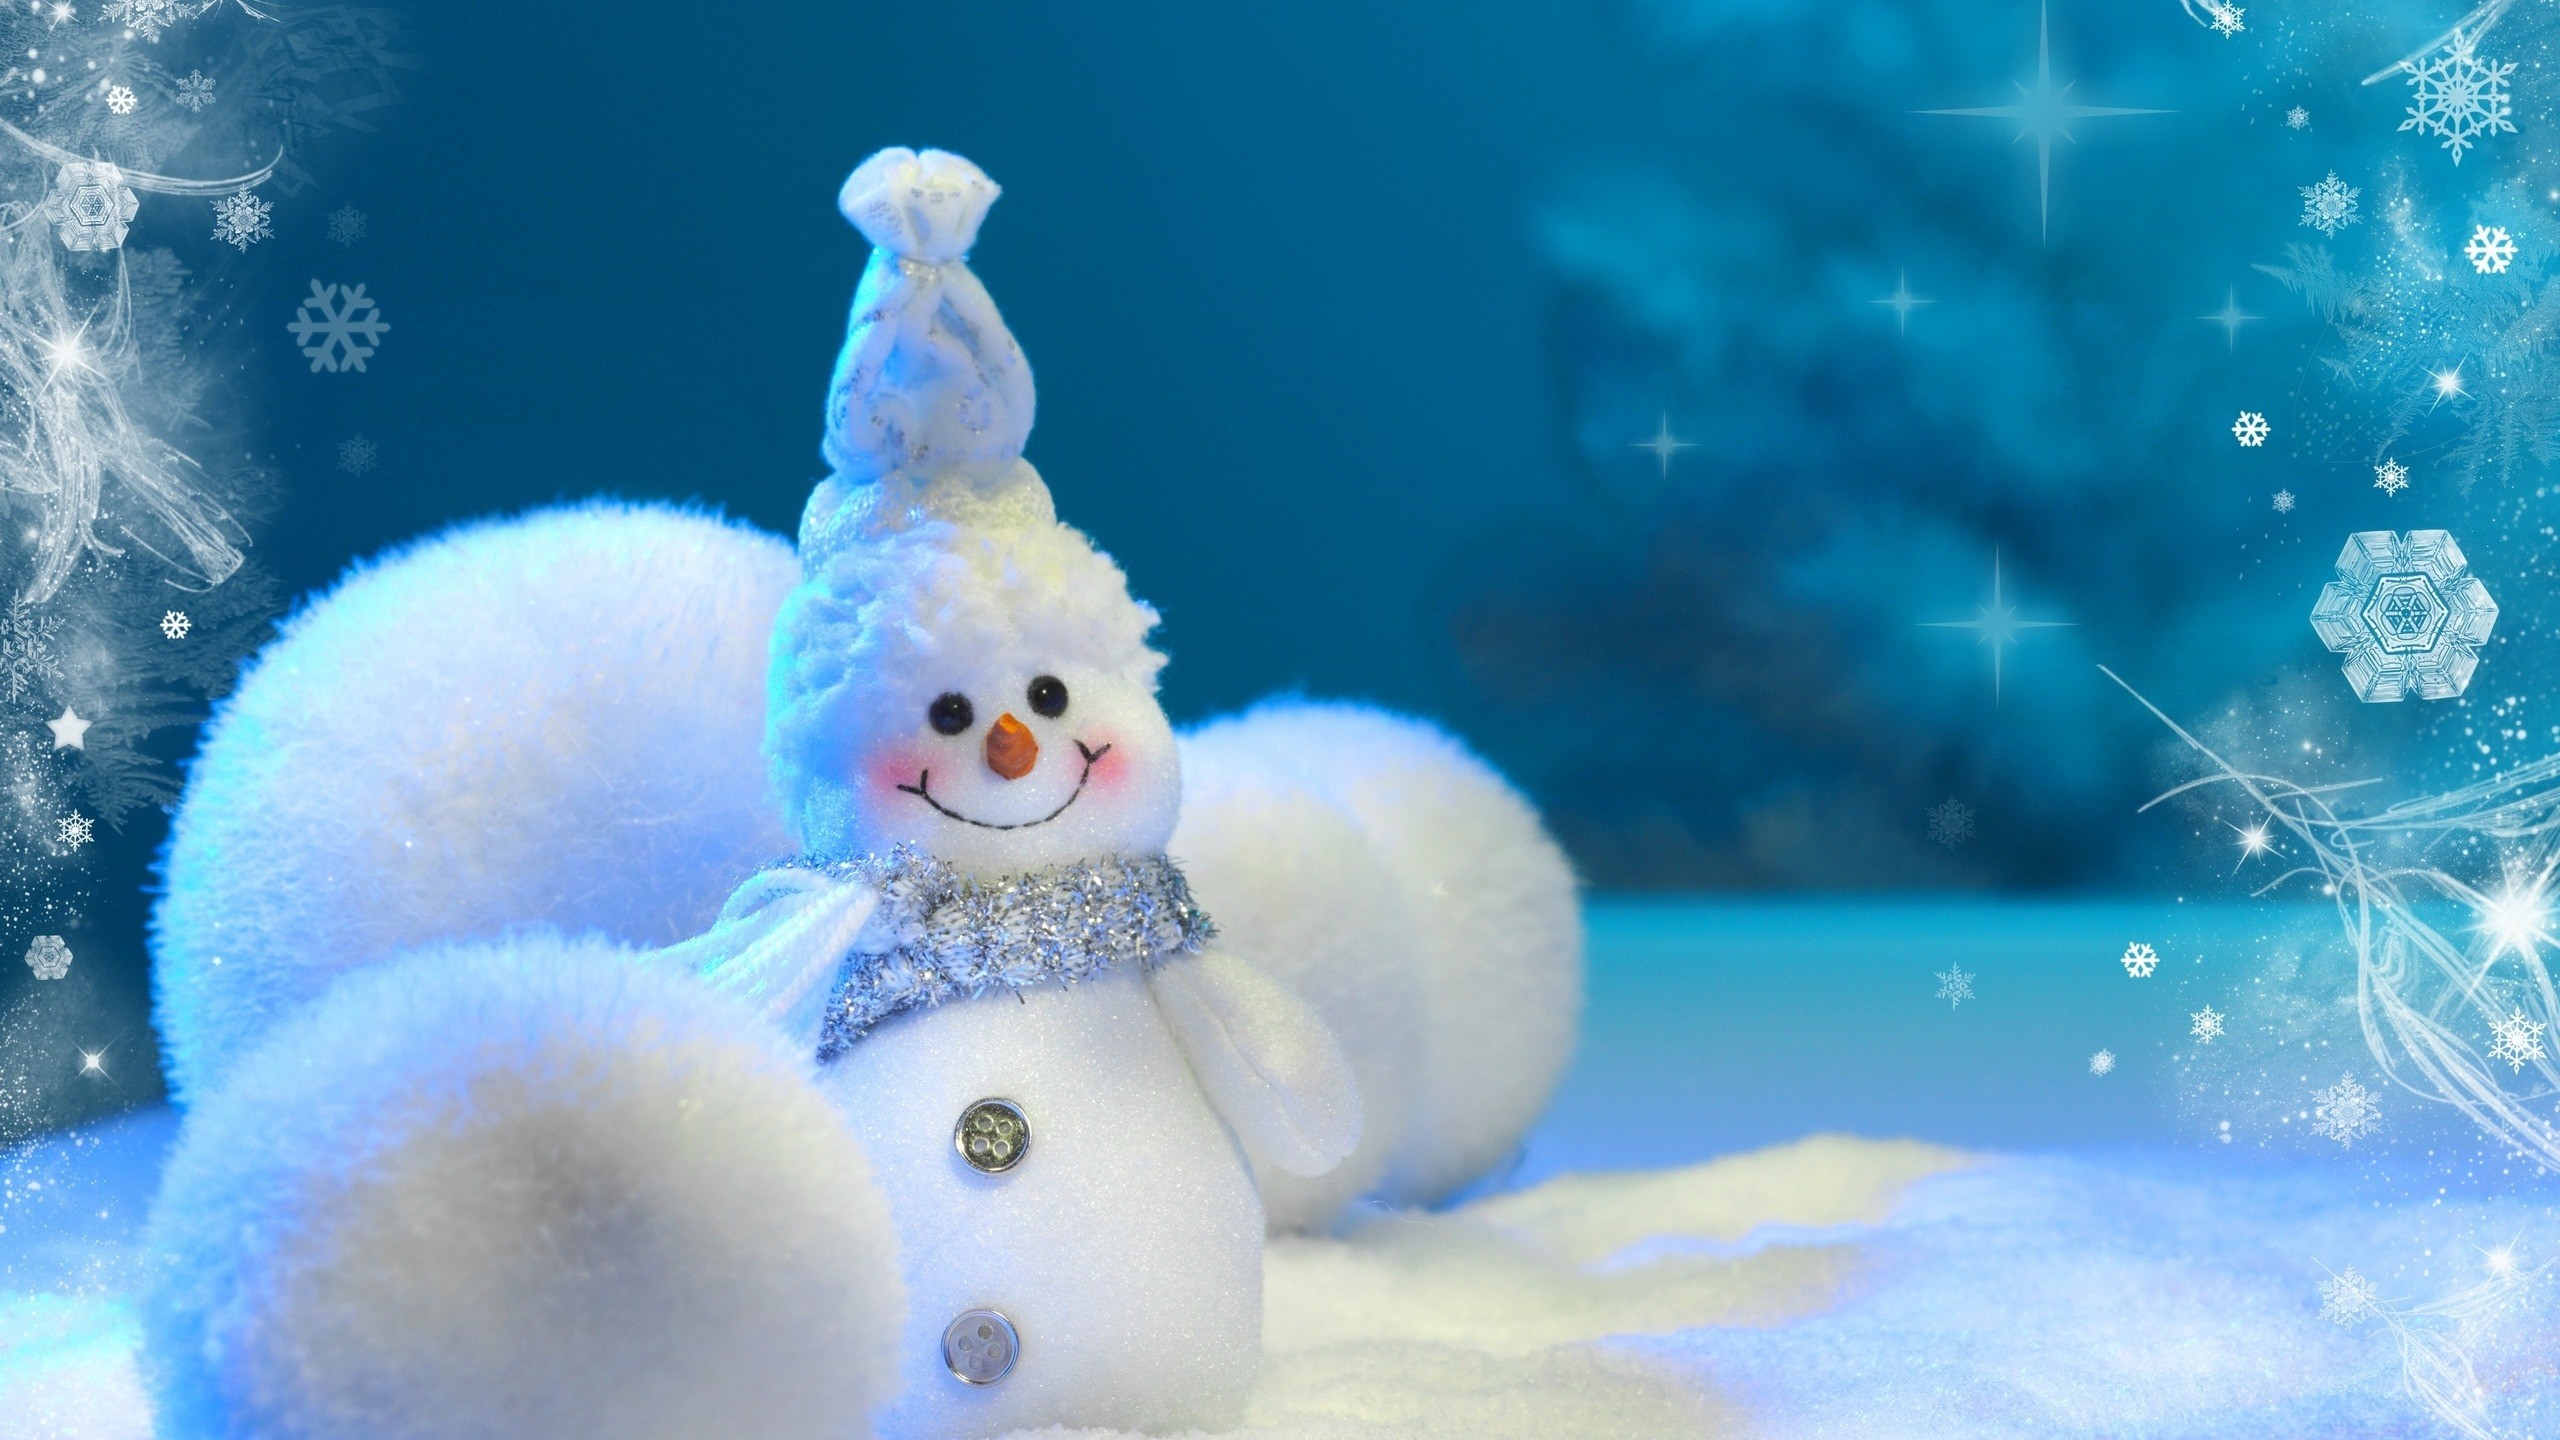 2560x1440 happy snowman winter wallpapers cool images high definition colourful  pictures mac desktop images samsung phone wallpapers widescreen 1080p  2560Ã1440 ...